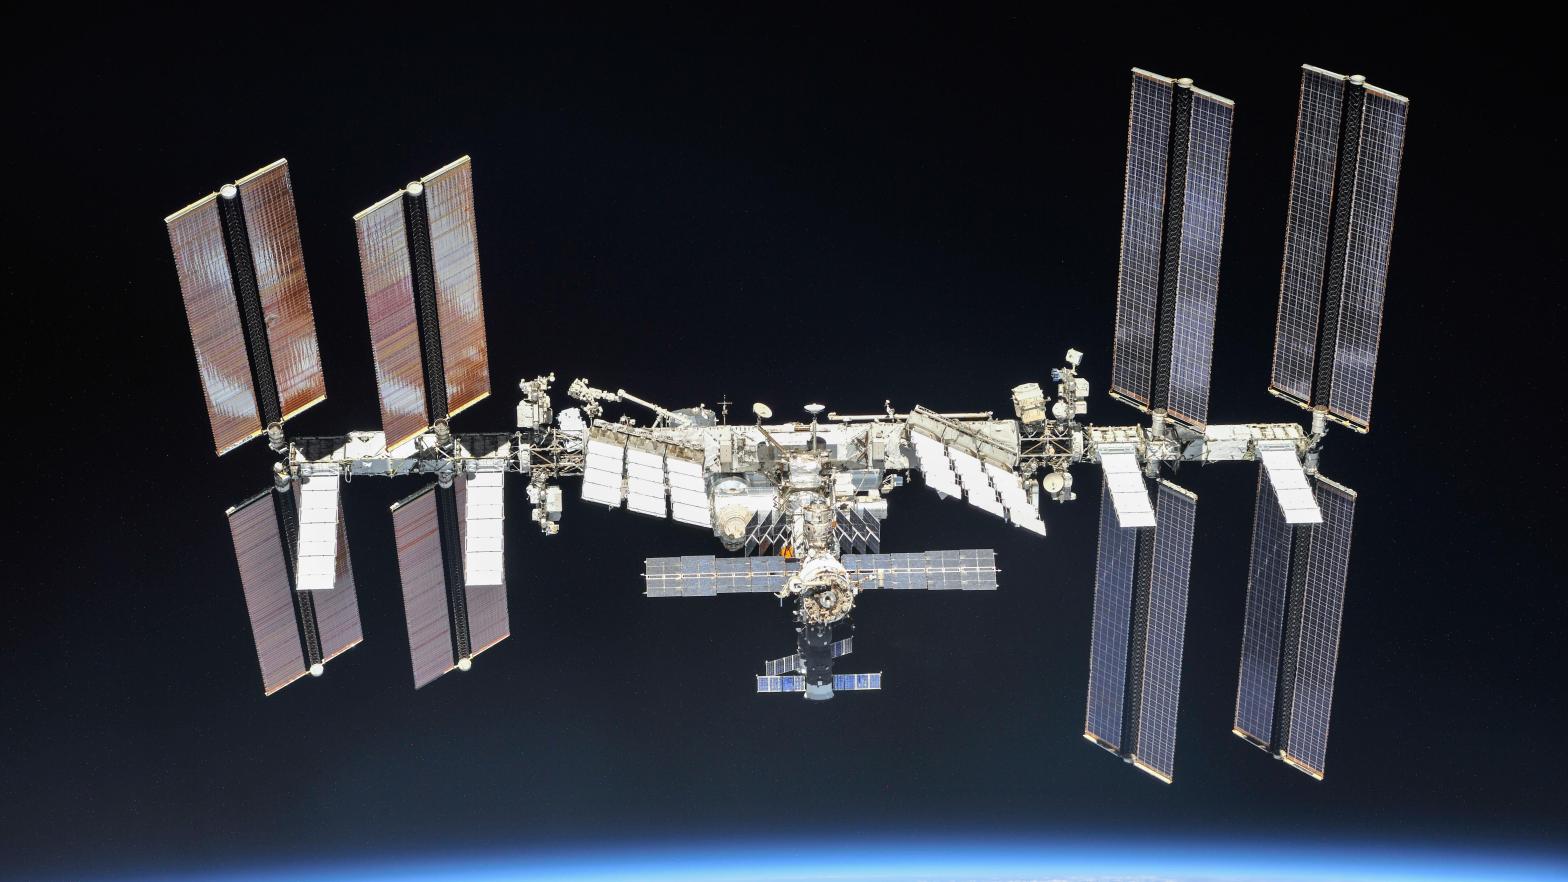 The Space Act Agreement between NASA and Colgate-Palmolive allows the company to access the International Space Station. (Image: NASA/Roscosmos)